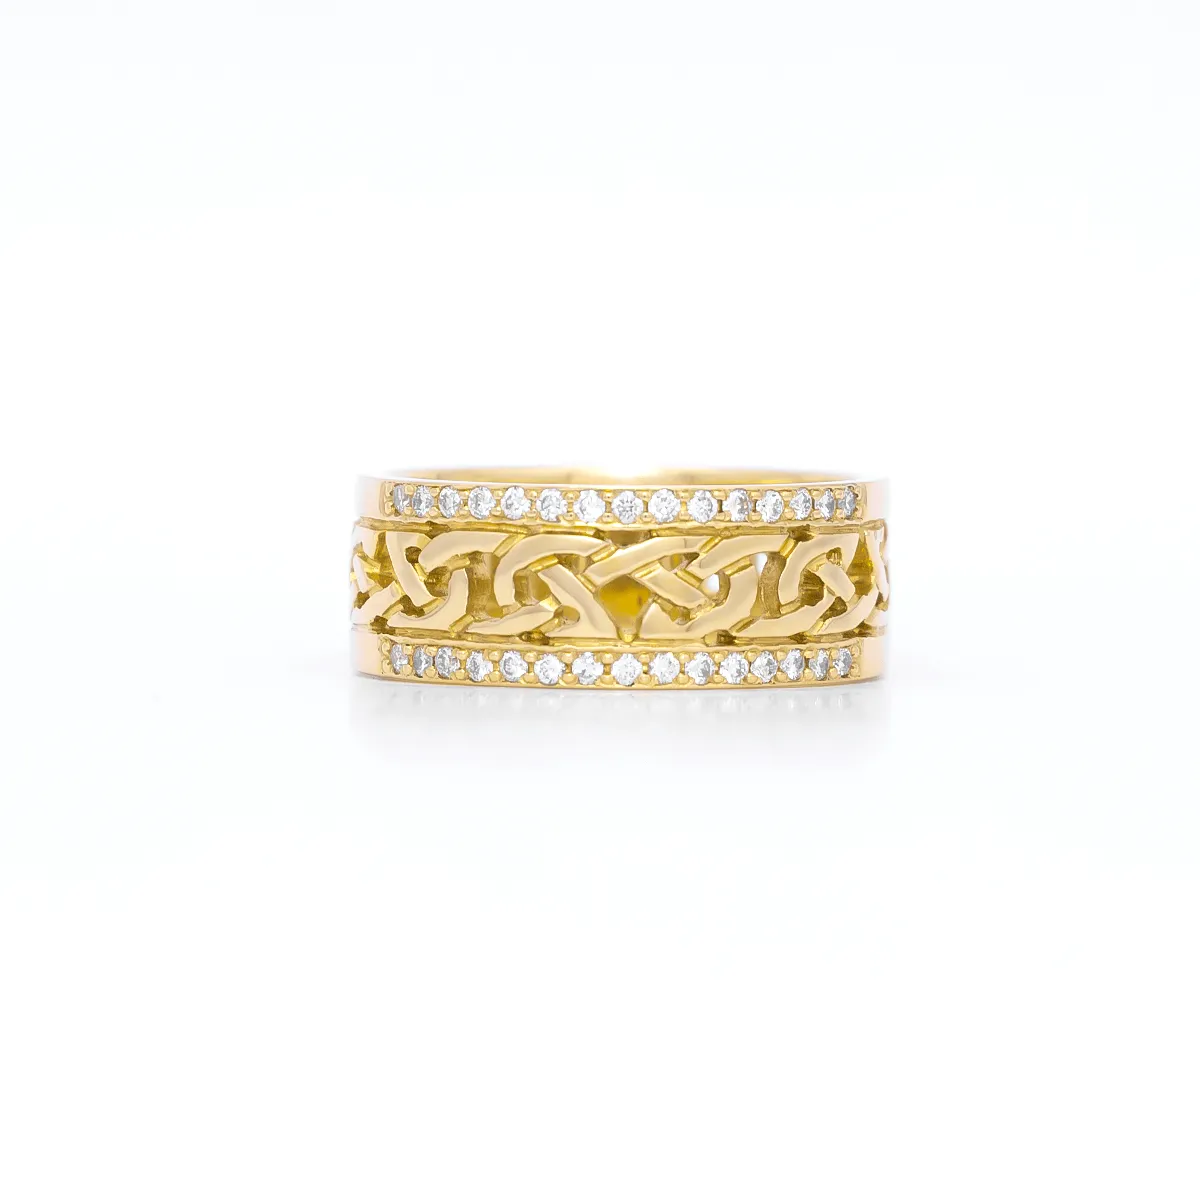 Ijc 1 Yellow Gold Celtic Ring With Diamonds 1...